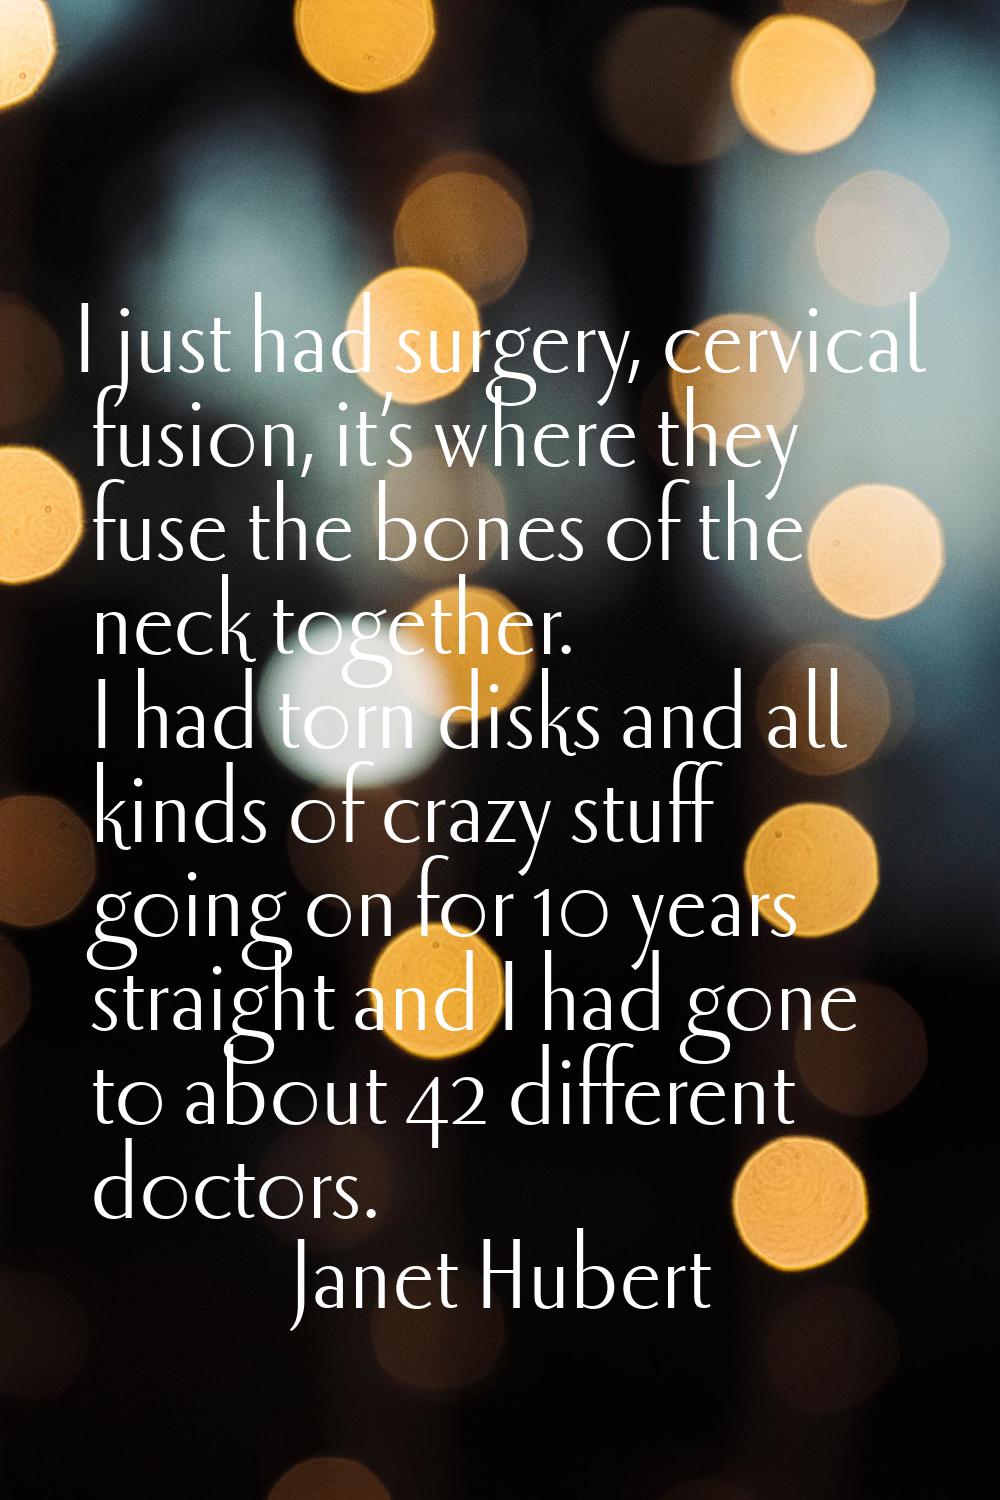 I just had surgery, cervical fusion, it’s where they fuse the bones of the neck together. I had tor